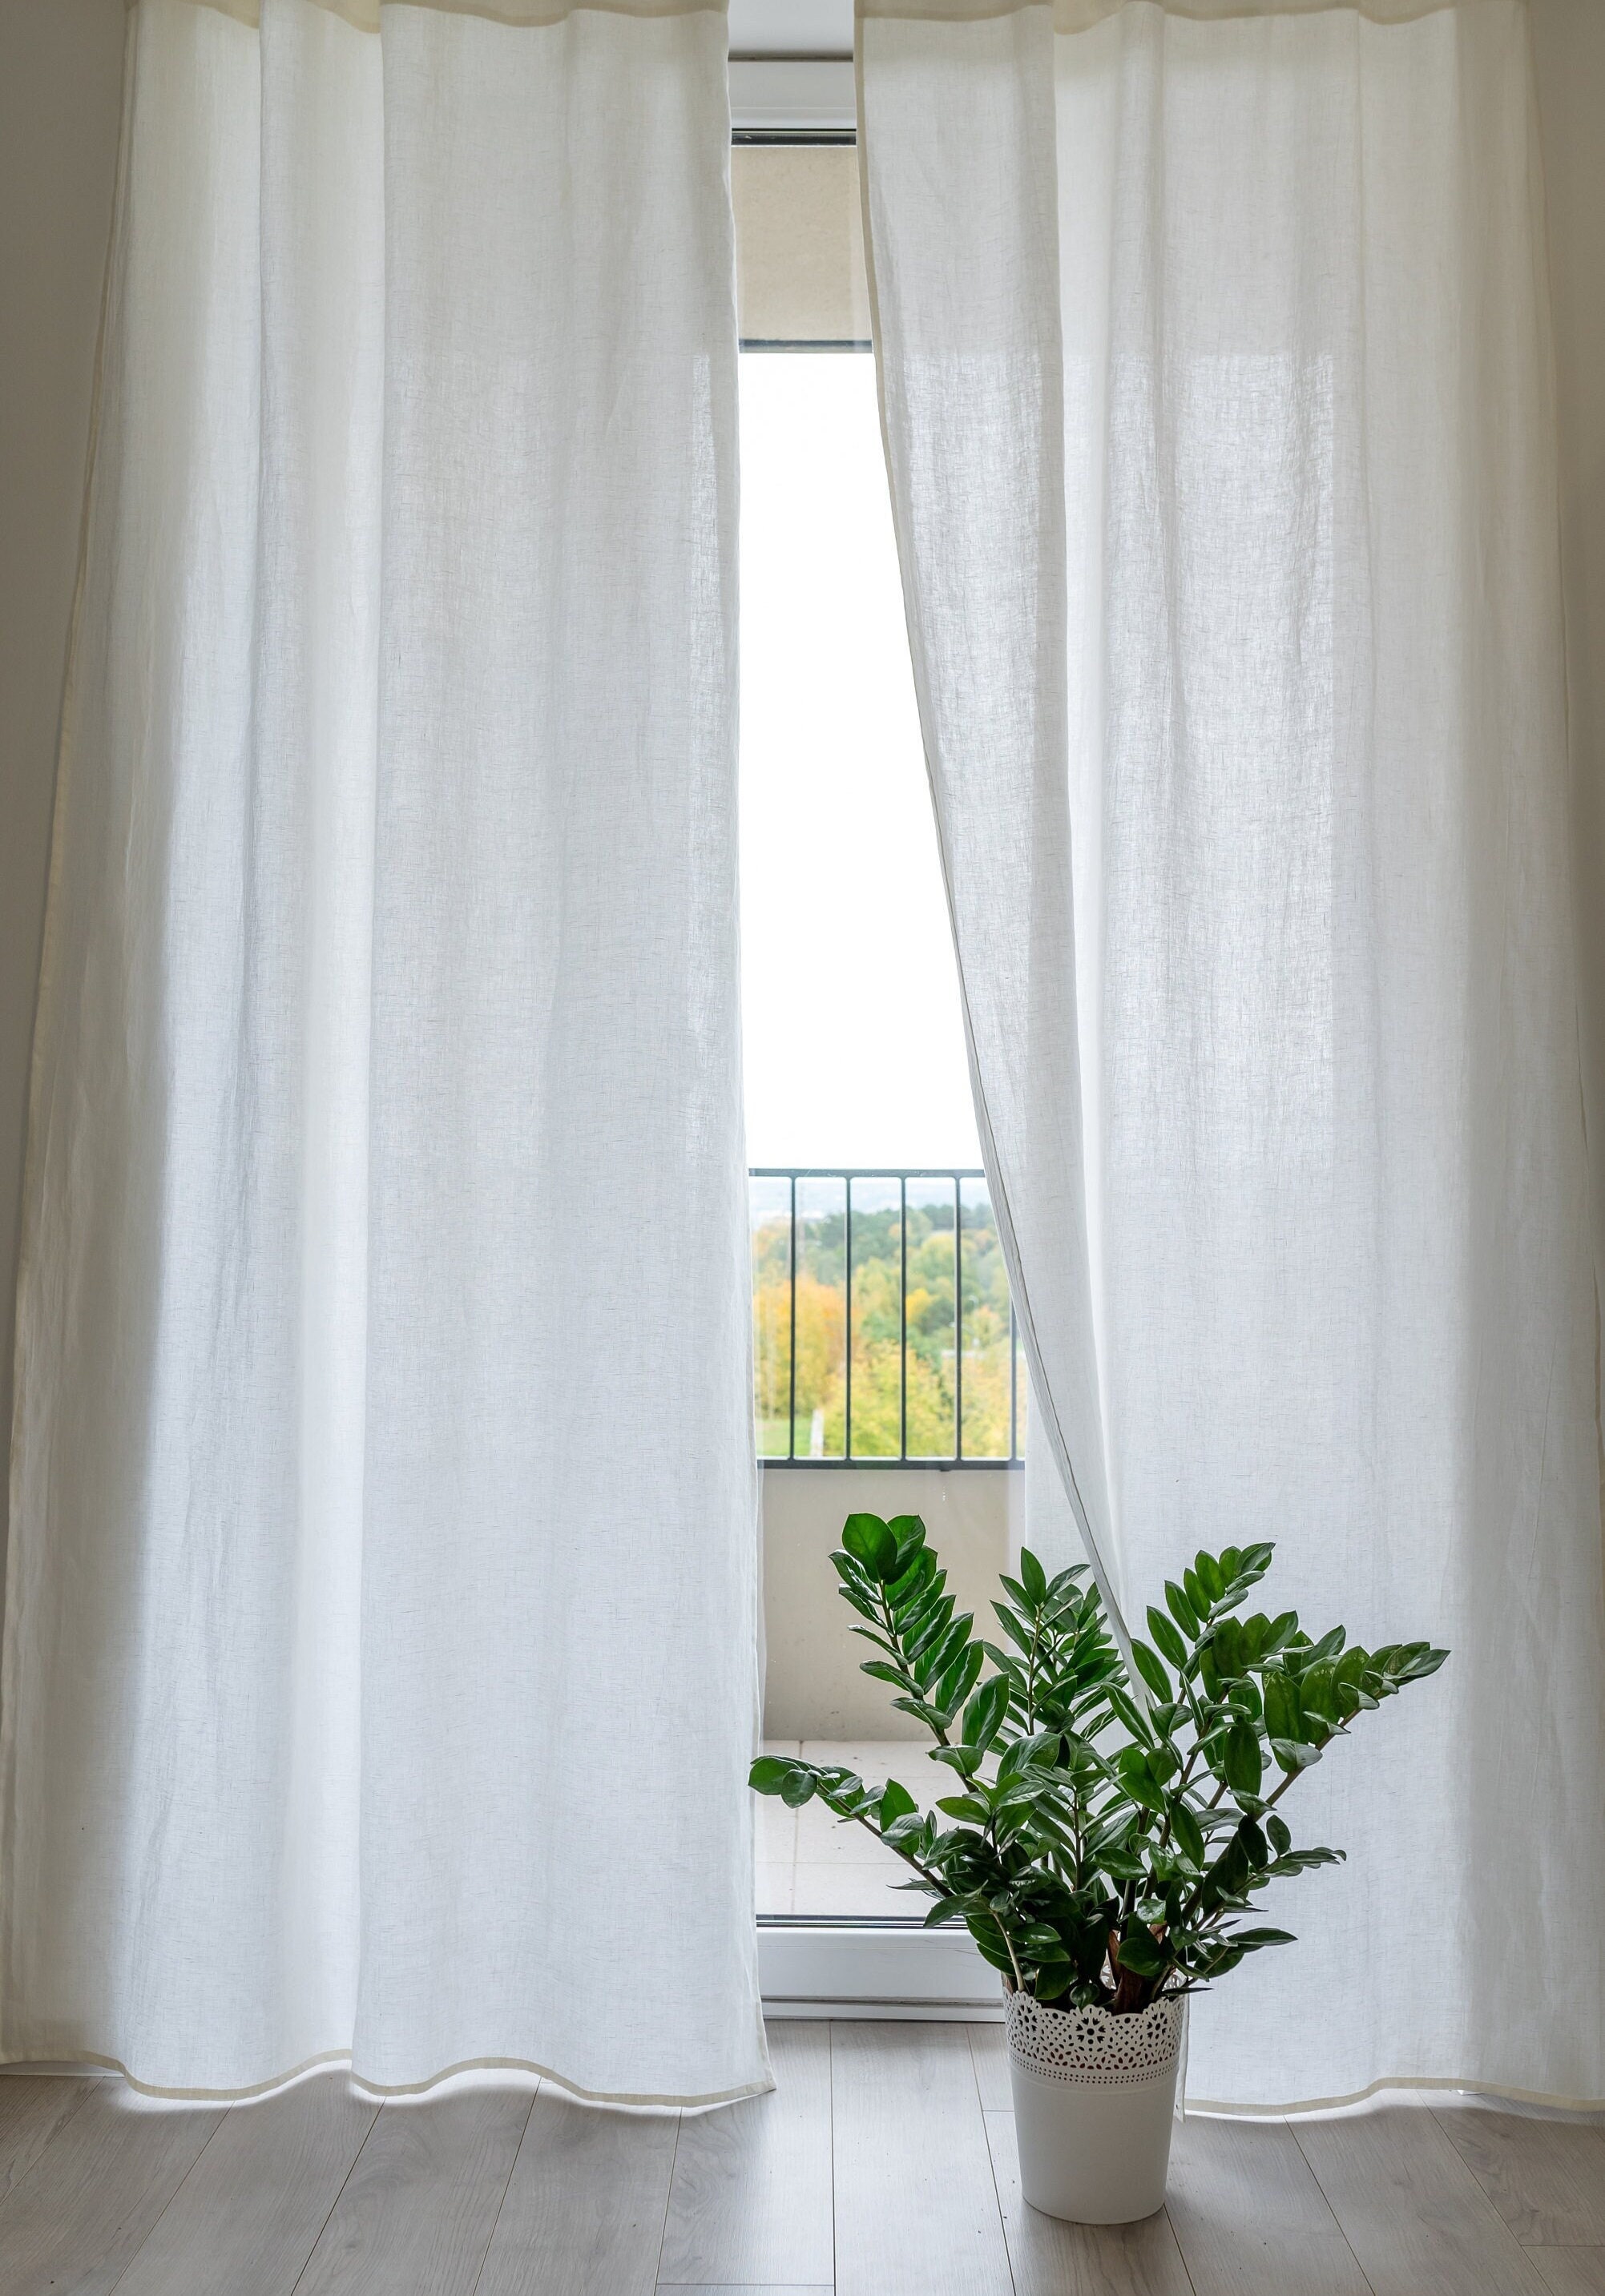 Linen Window Curtains, 8 Colors, Sheer Linen Curtain Panels With